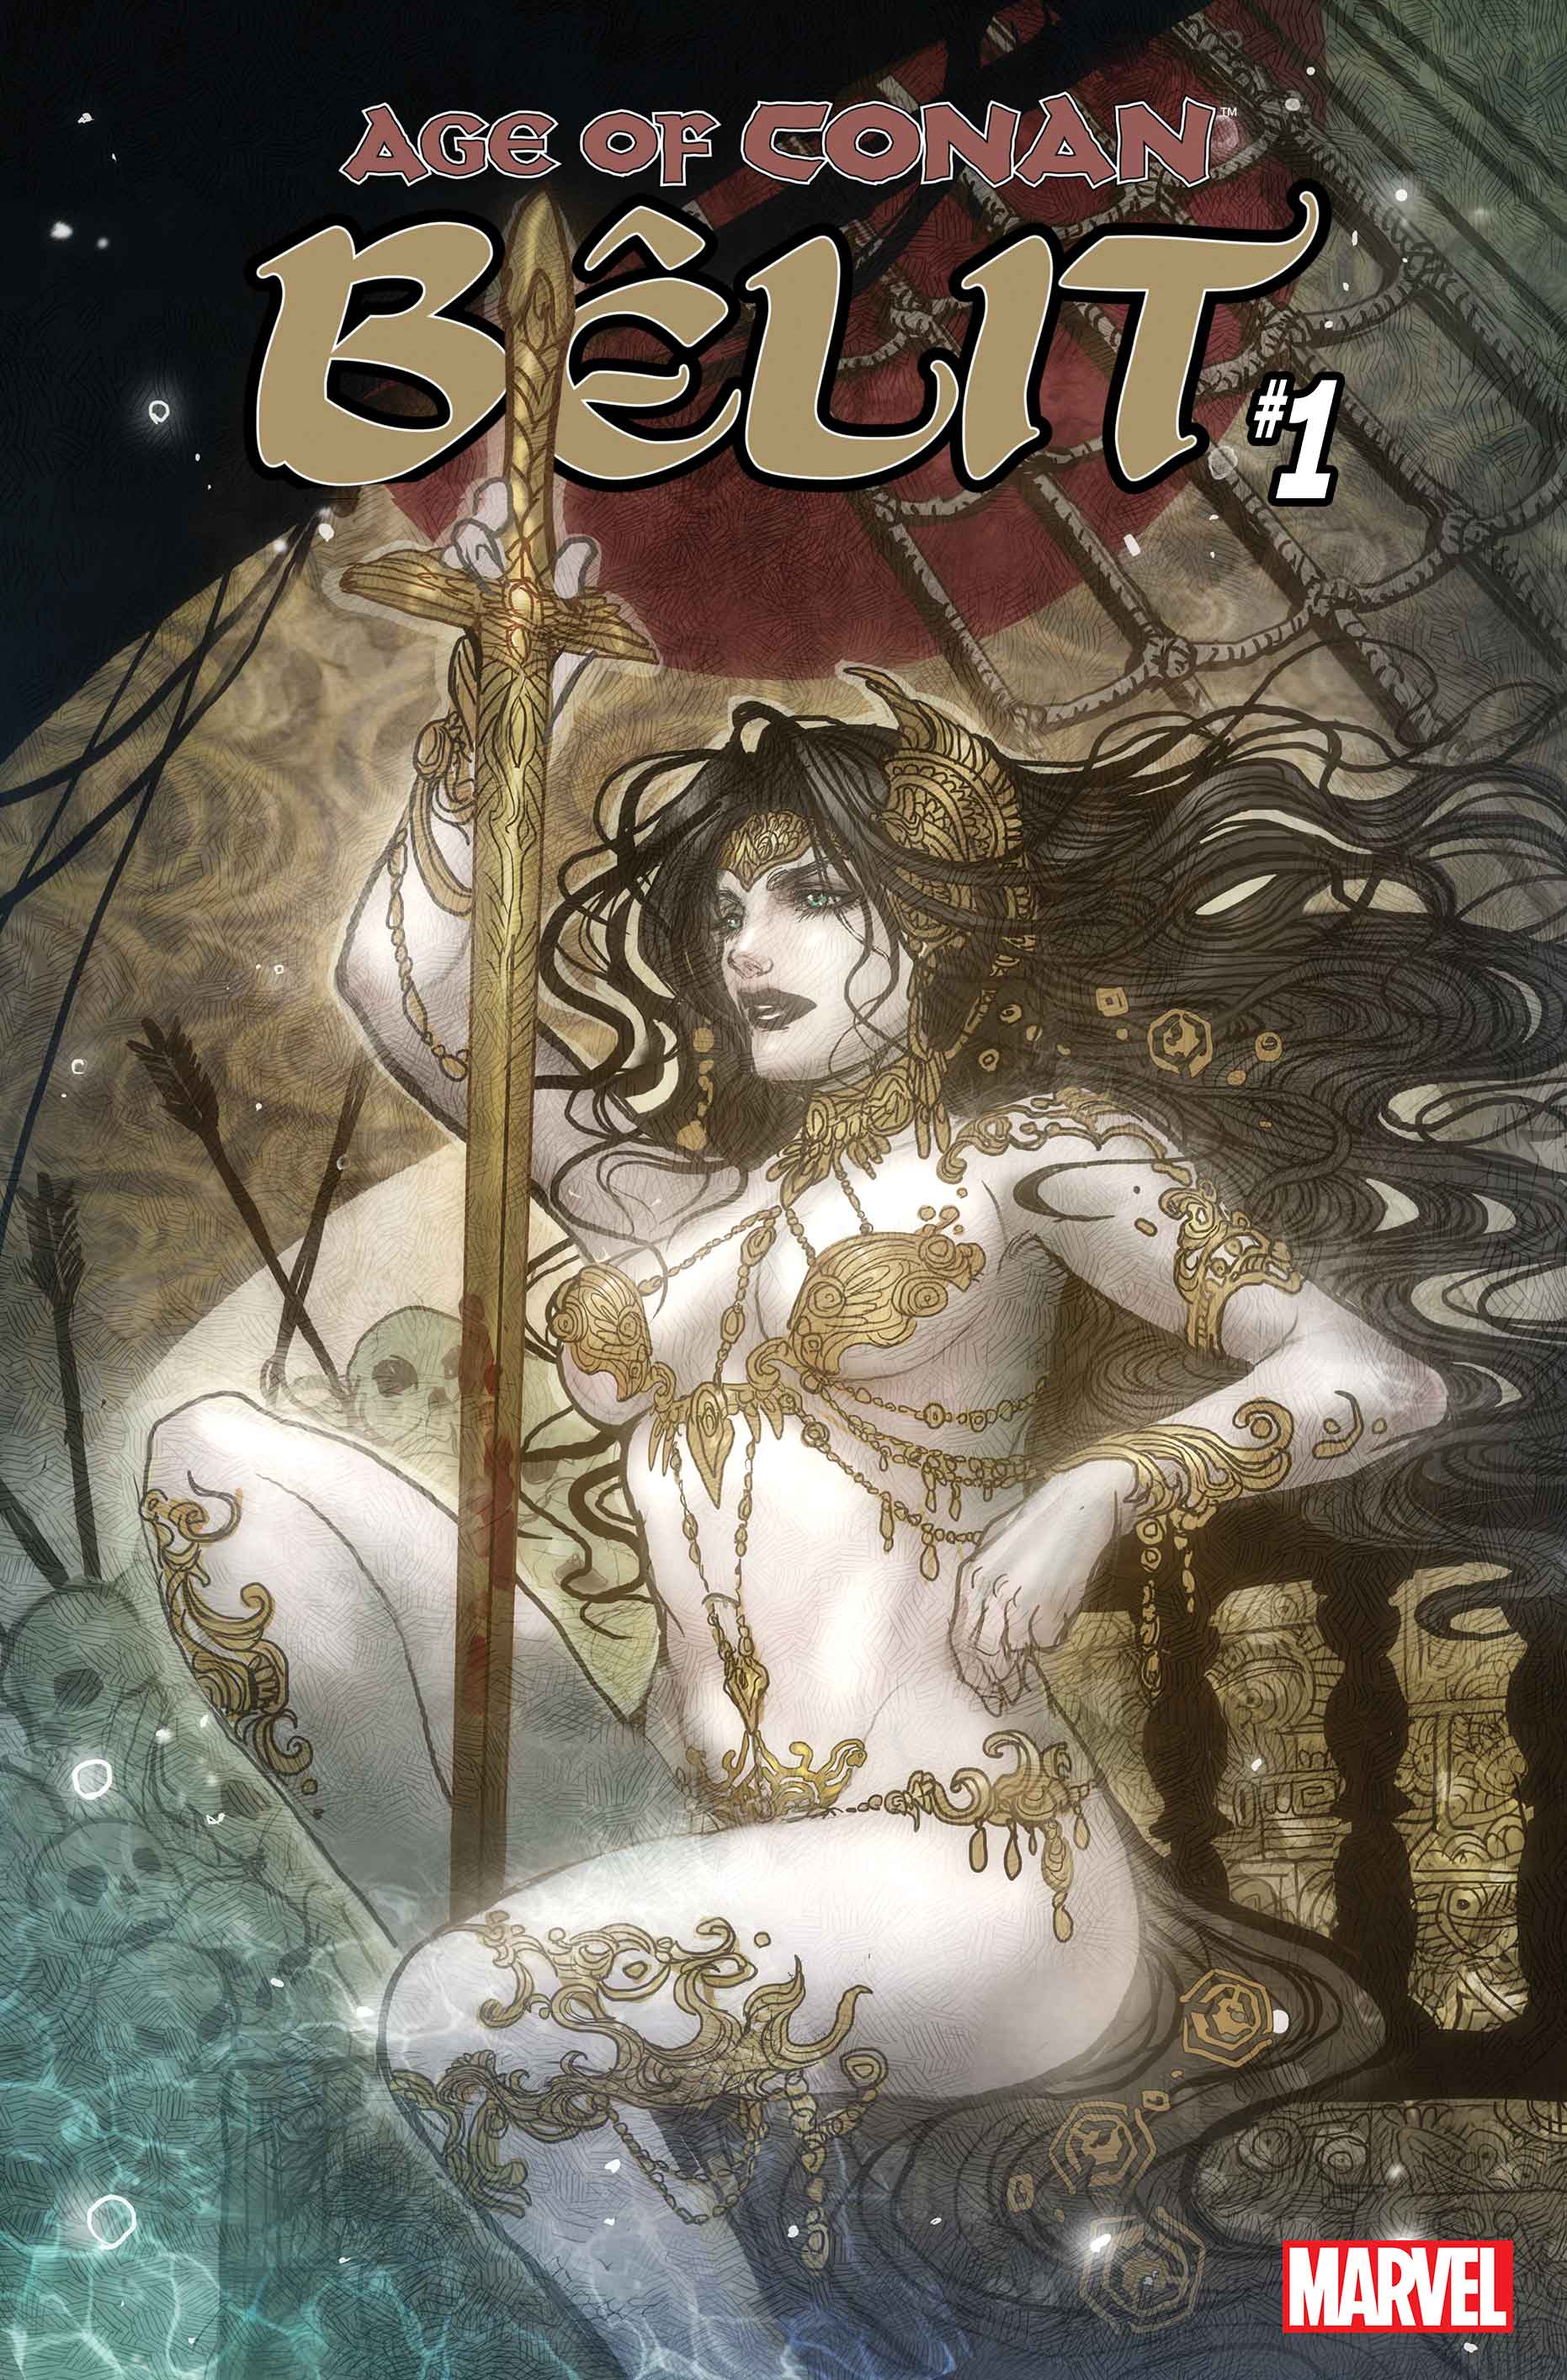 First Look: The pirate queen returns in 'Age of Conan: Bélit' this March